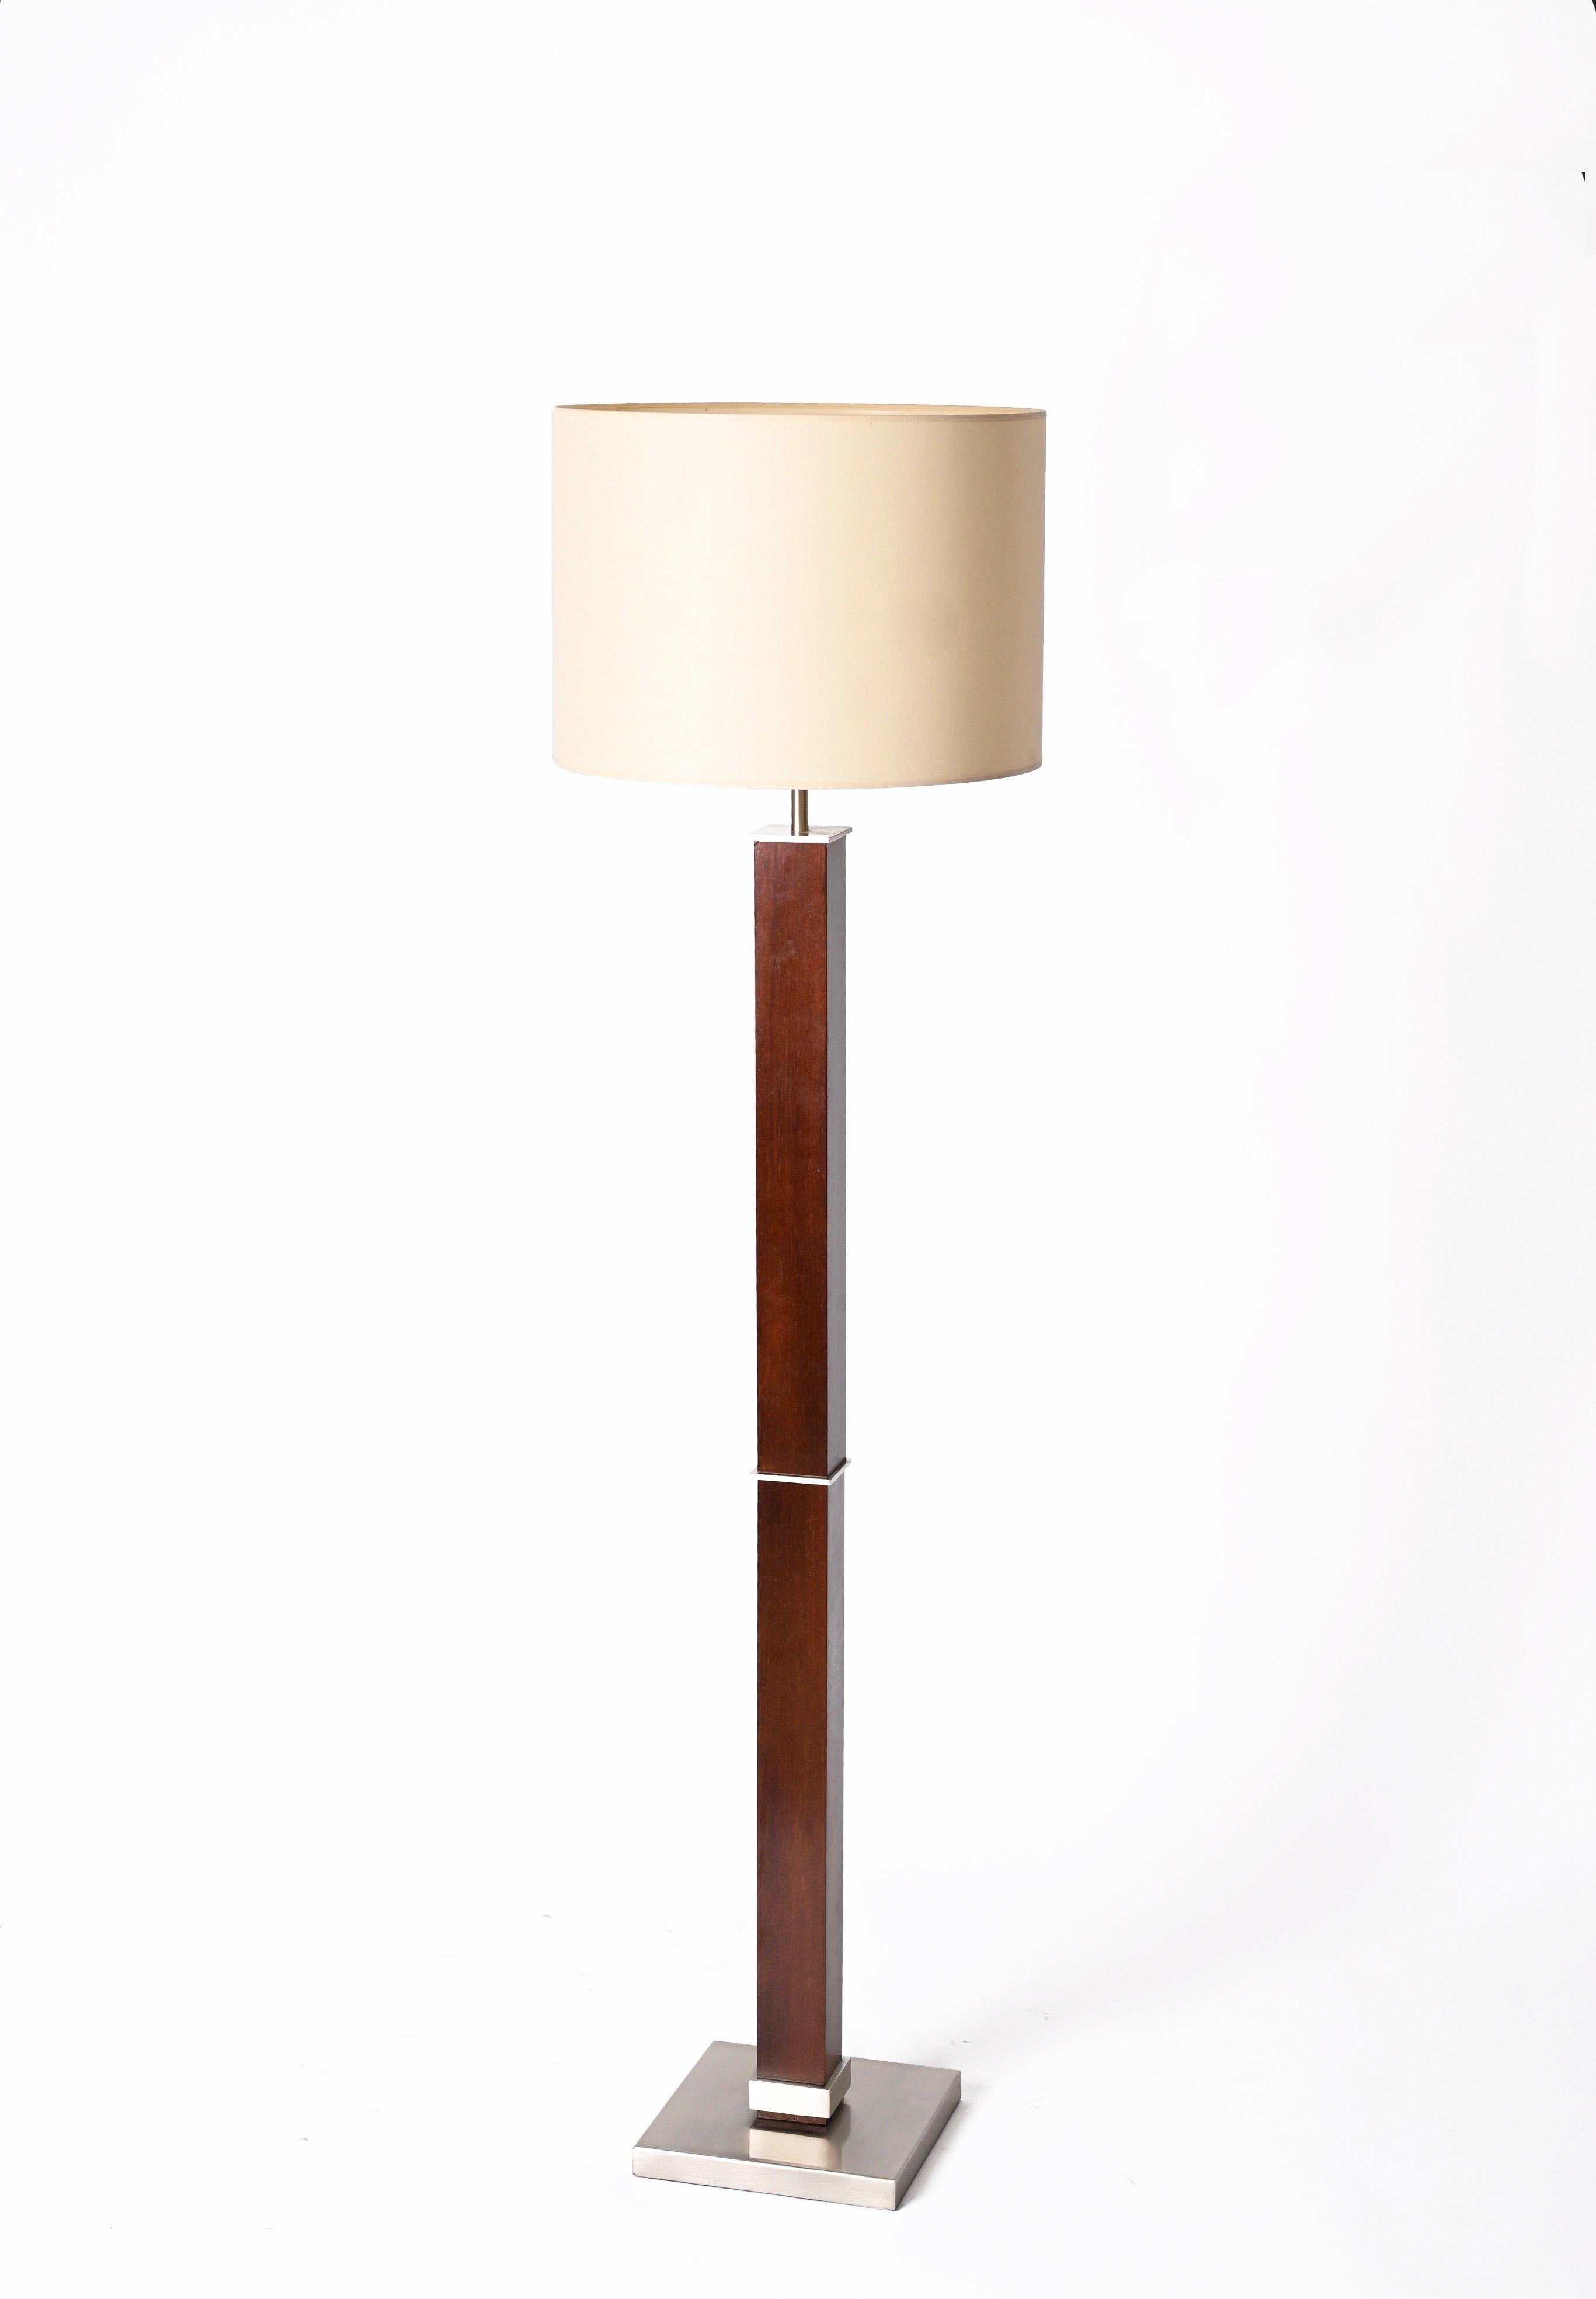 Amazing minimal midcentury wood and steel floor lamp. This fantastic item was produced in Italy during the 1980s by Zonca Voghera.

This lamp is very beautiful example of the design from the 1980s, it is made with solid wood and has a base and